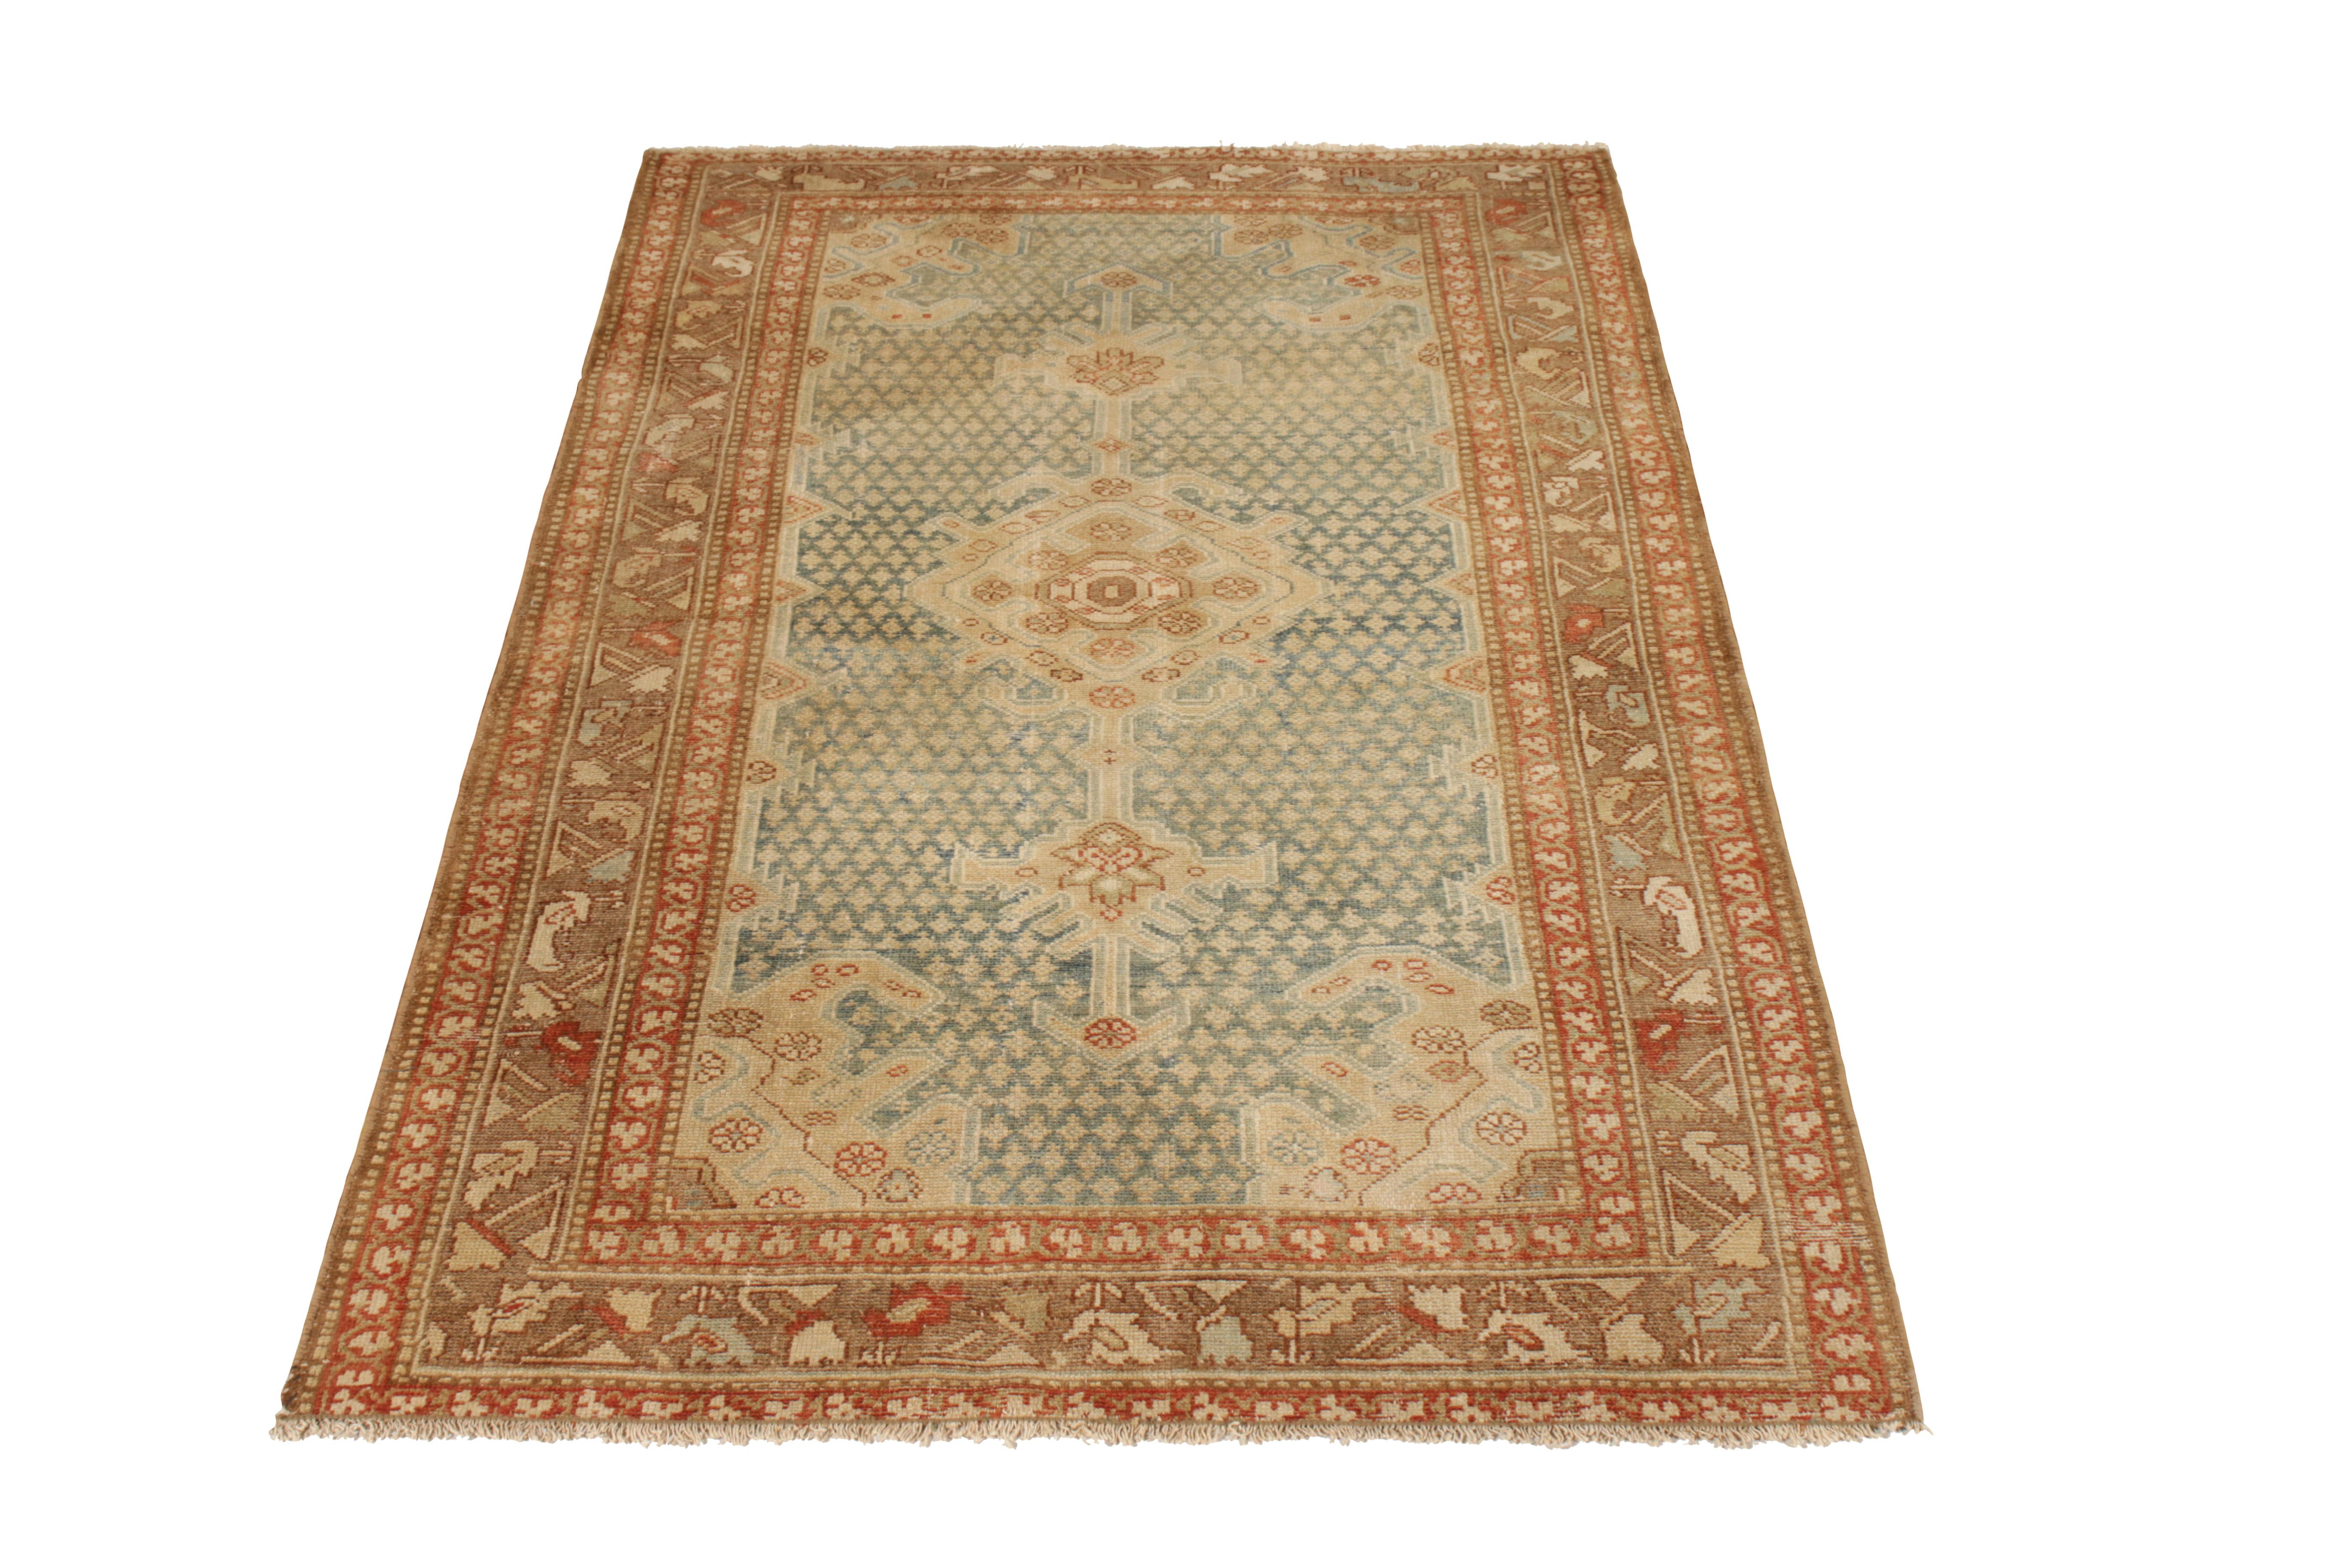 A 3 x 6 antique Persian rug of Malayer design, hand knotted in wool, circa 1920-1930. Enjoying a gorgeous medallion pattern in blue and beige-brown, all in good condition for its age and origin. Well suited in versatile size to entryways, hallways,